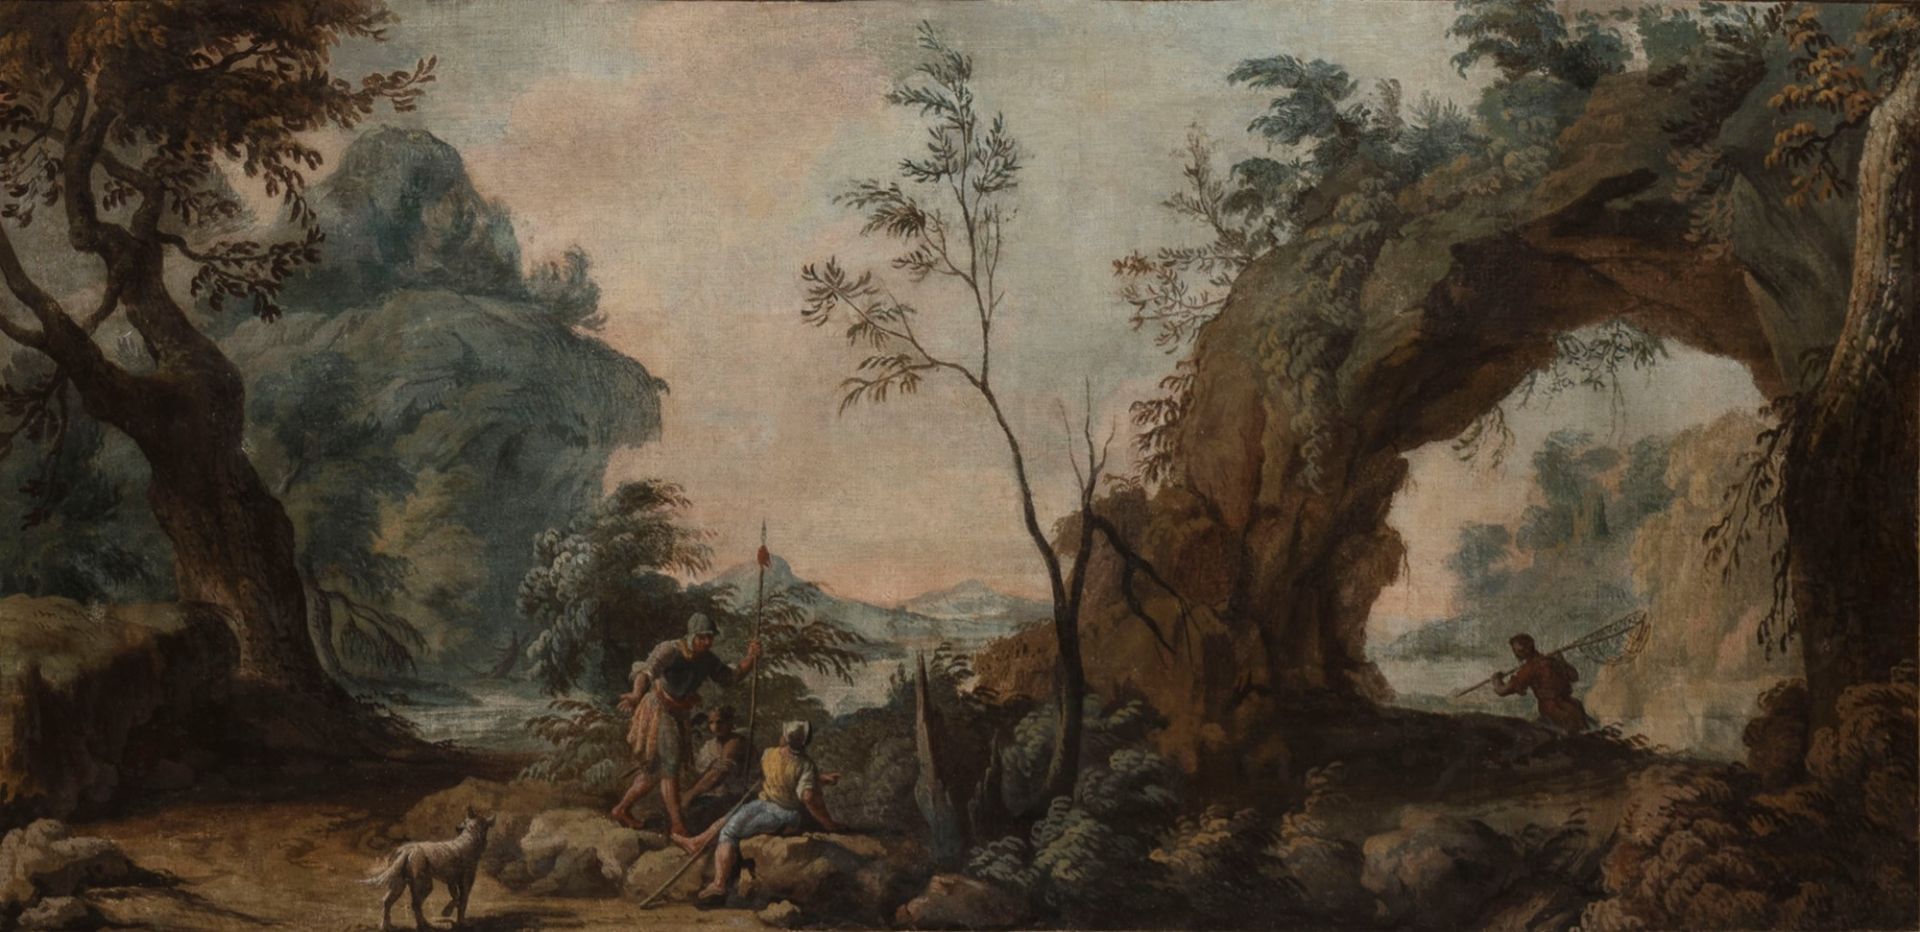 Attributed to Andrea Locatelli (Rome 1695 - 1741) - Landscape with natural arch and resting soldier